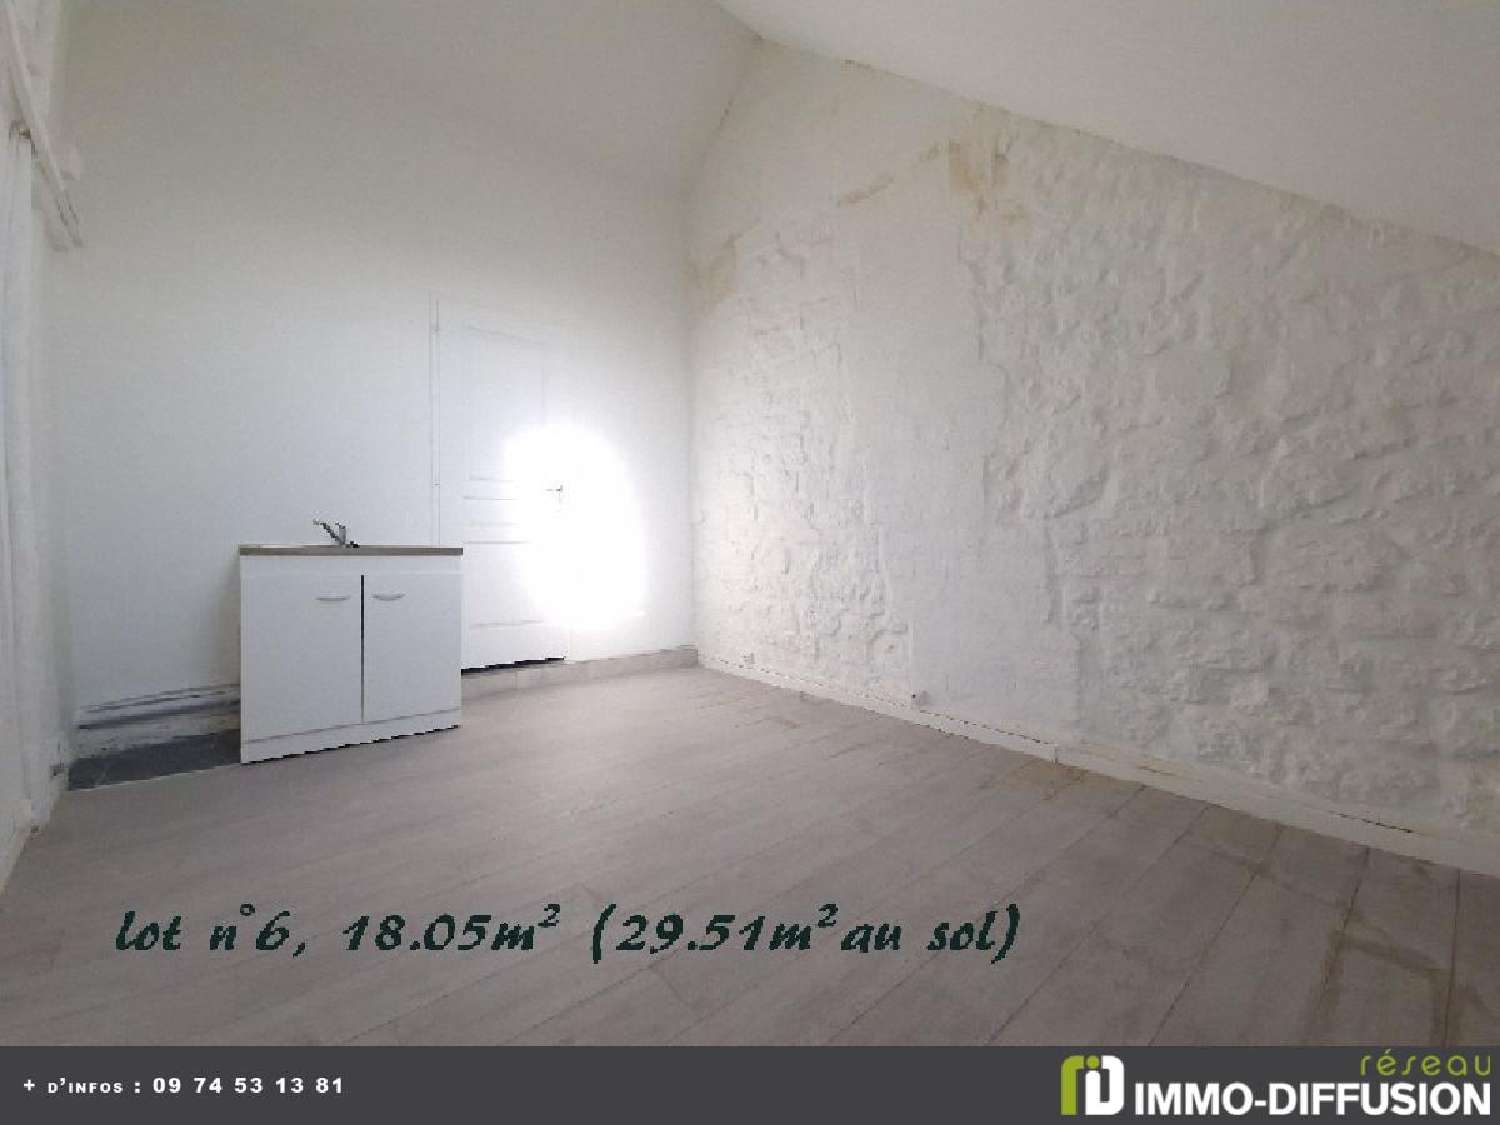  for sale apartment Montataire Oise 5